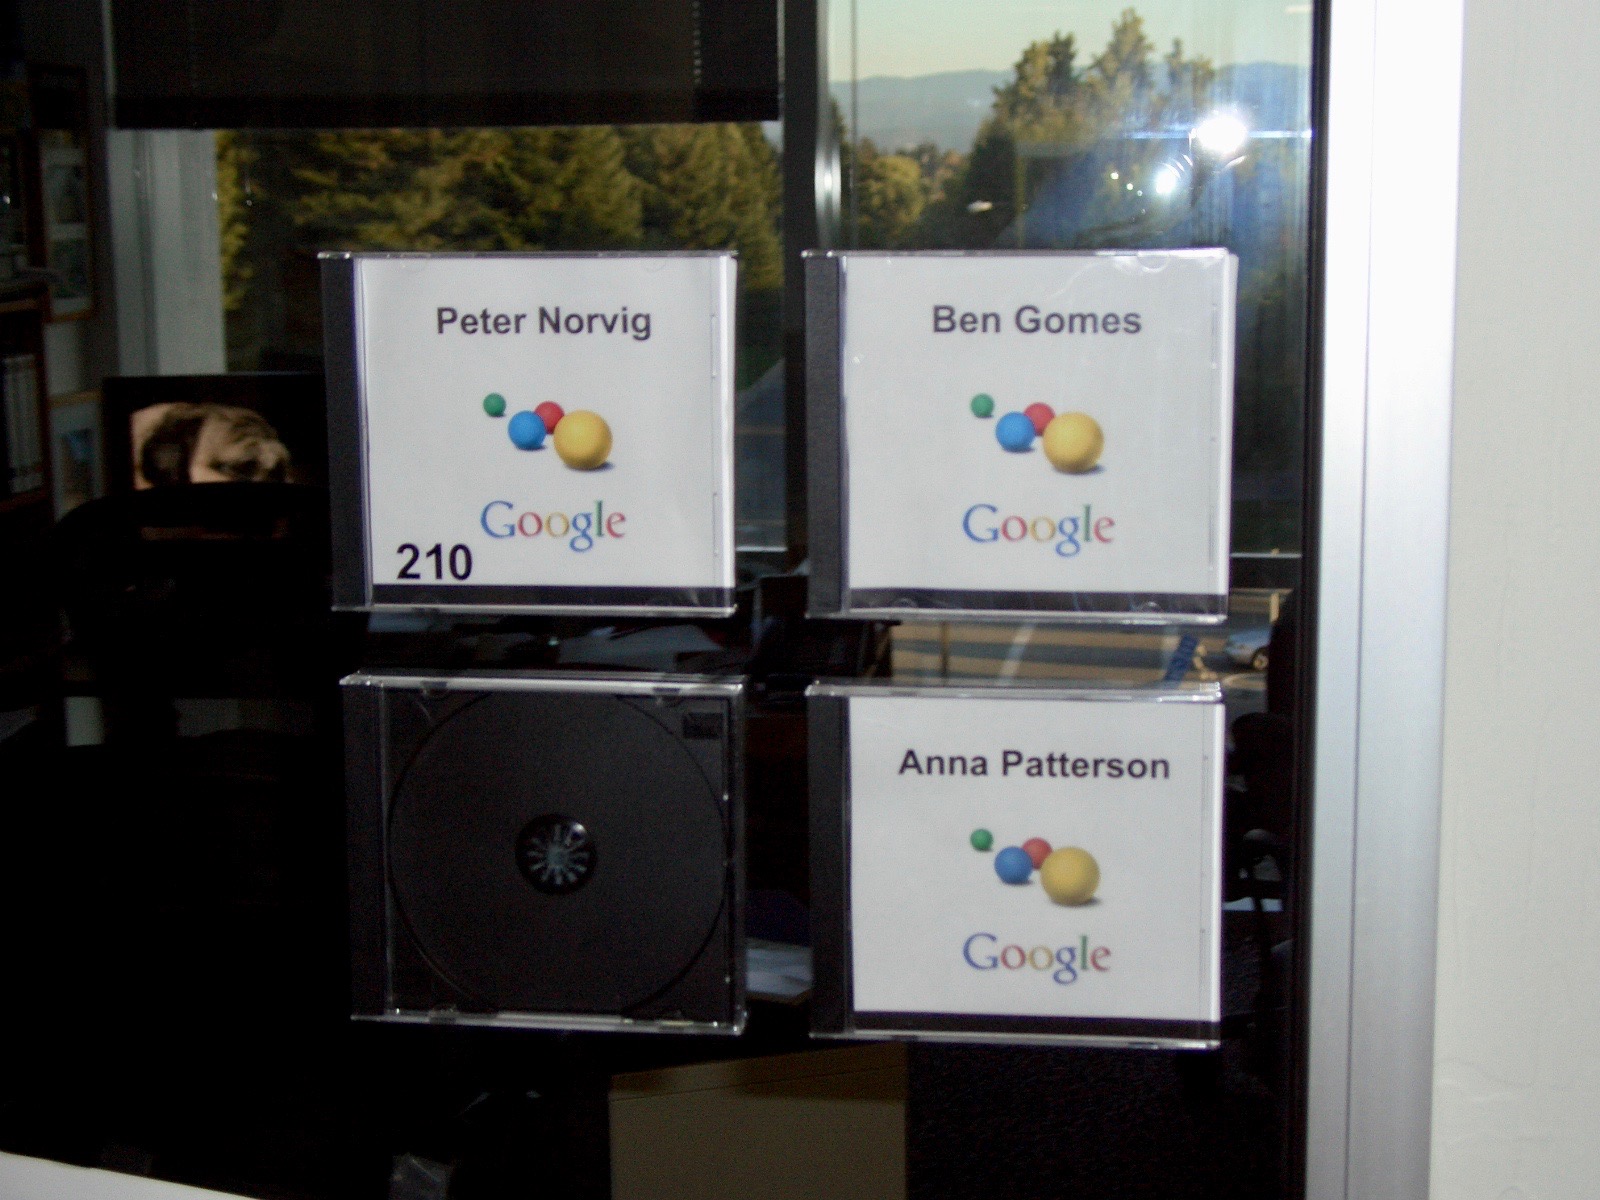 Peter Norvig's shared office